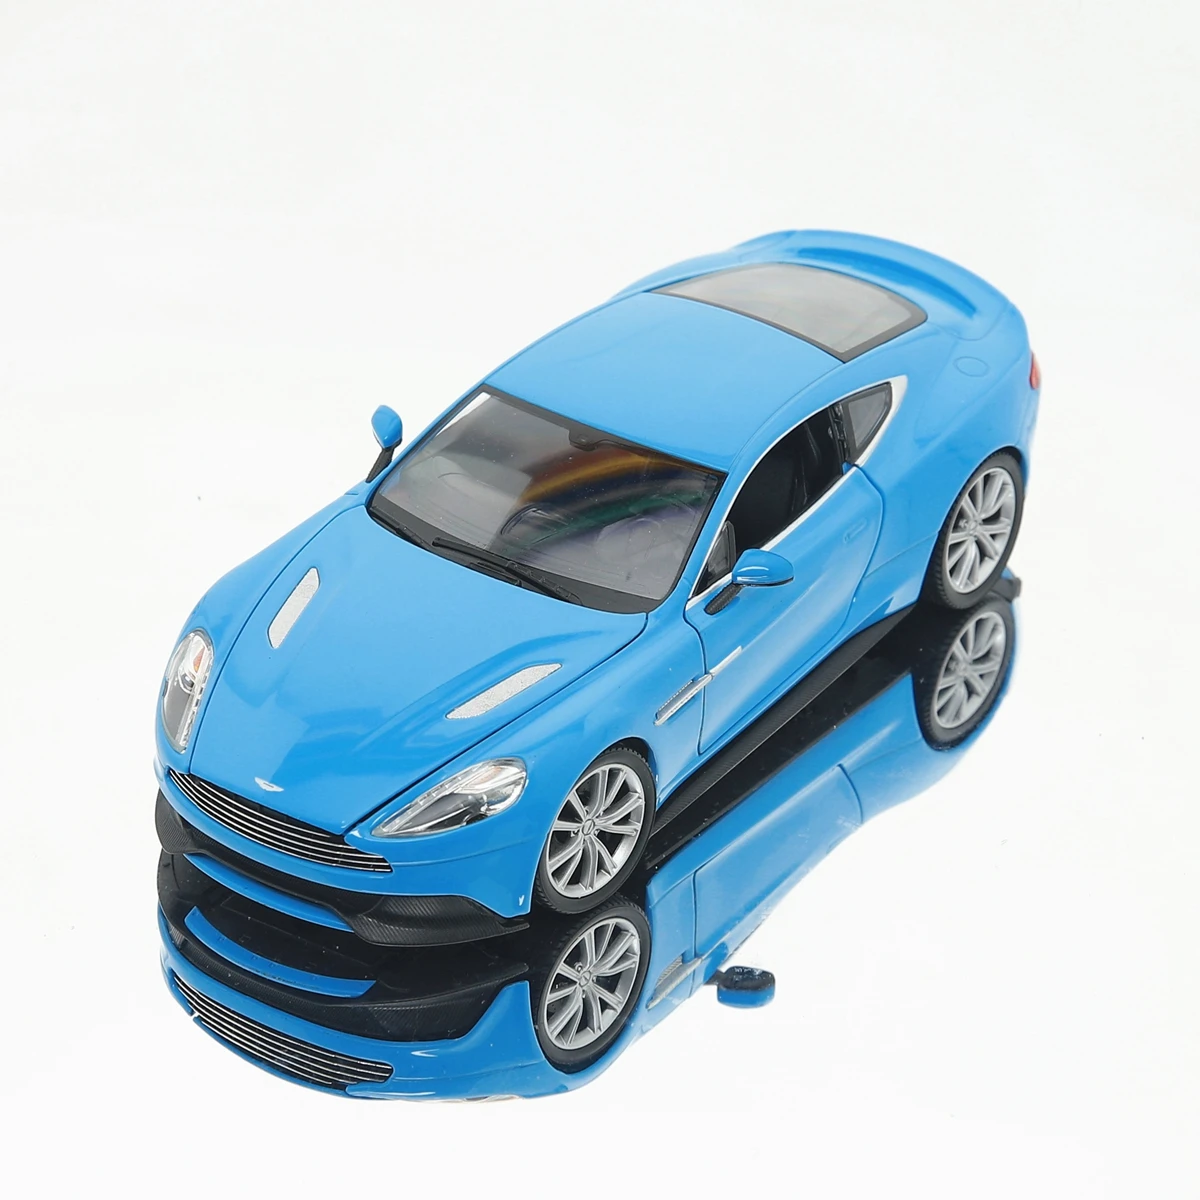 

WELLY 1:24 Aston Martin Vanquish Alloy Luxury Vehicle Diecast Pull Back Cars Model Toy Collection Xmas Gift